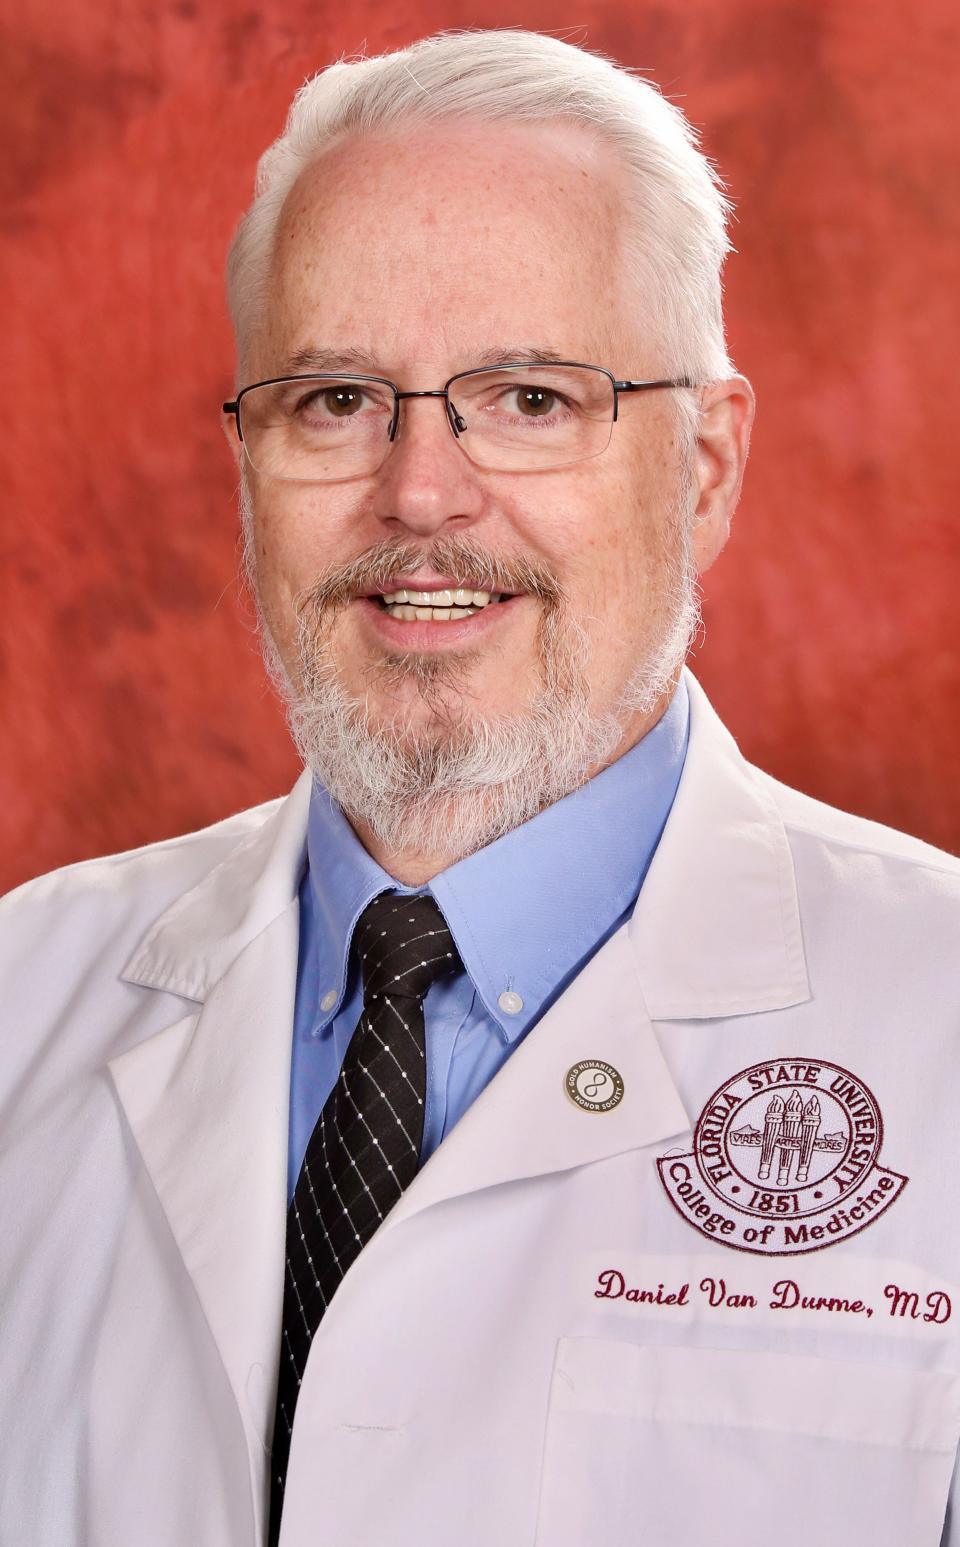 Daniel Van Durme was the chief medical officer at Florida State University's College of Medicine.